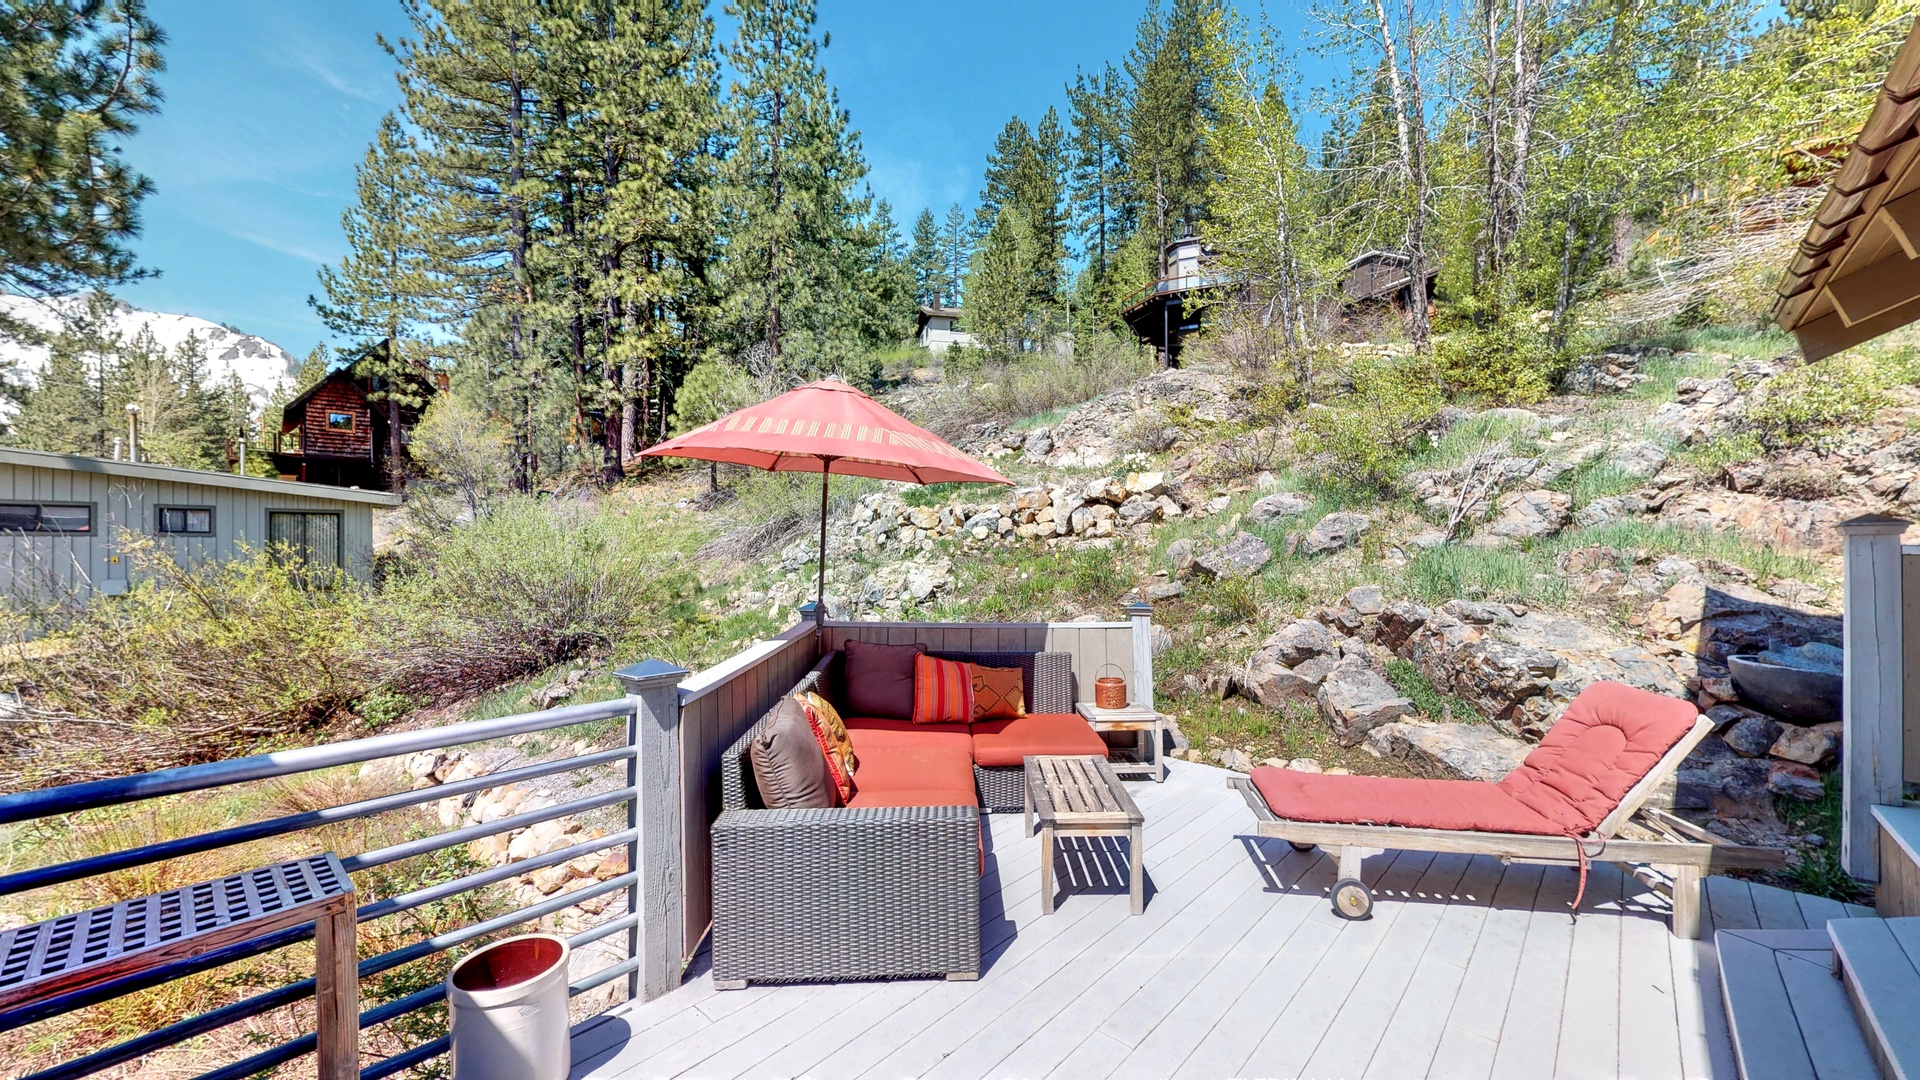 Outdoor seating at this squaw valley rental: Eagle's Nest Lodge